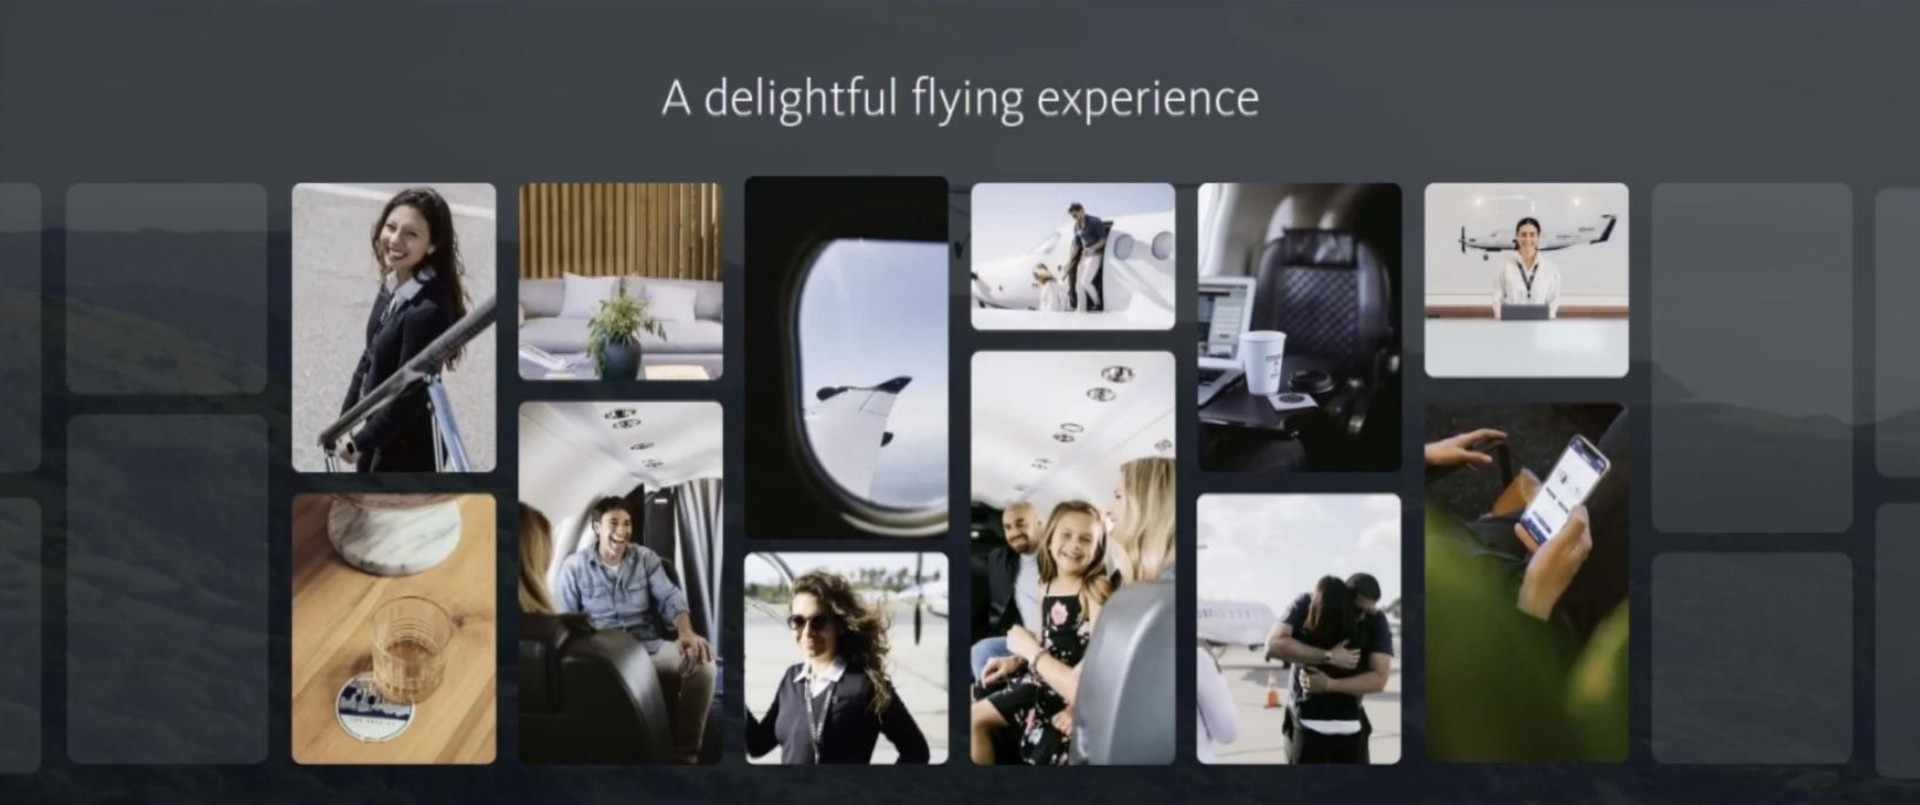 a delightful flying experience | Surf Air